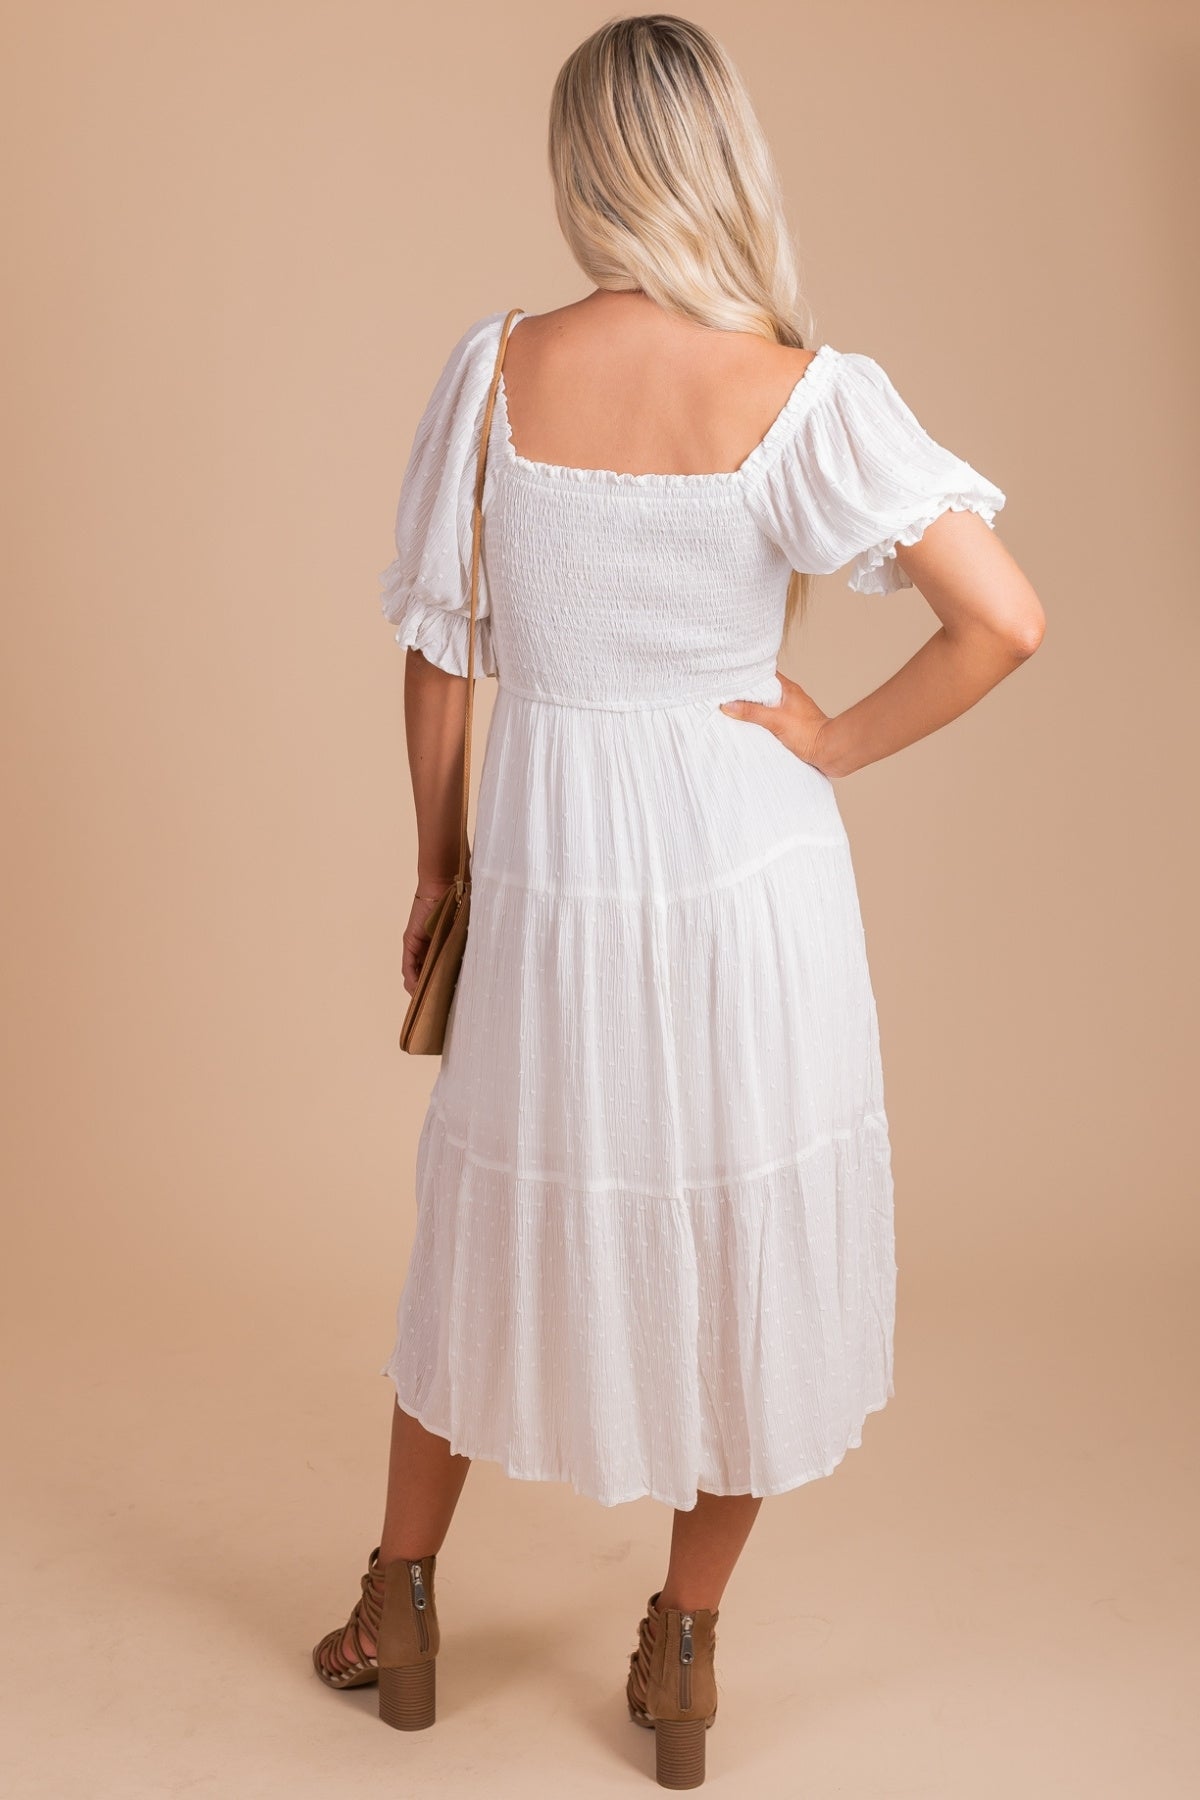 Smocked Dress with Tiered Skirt in White